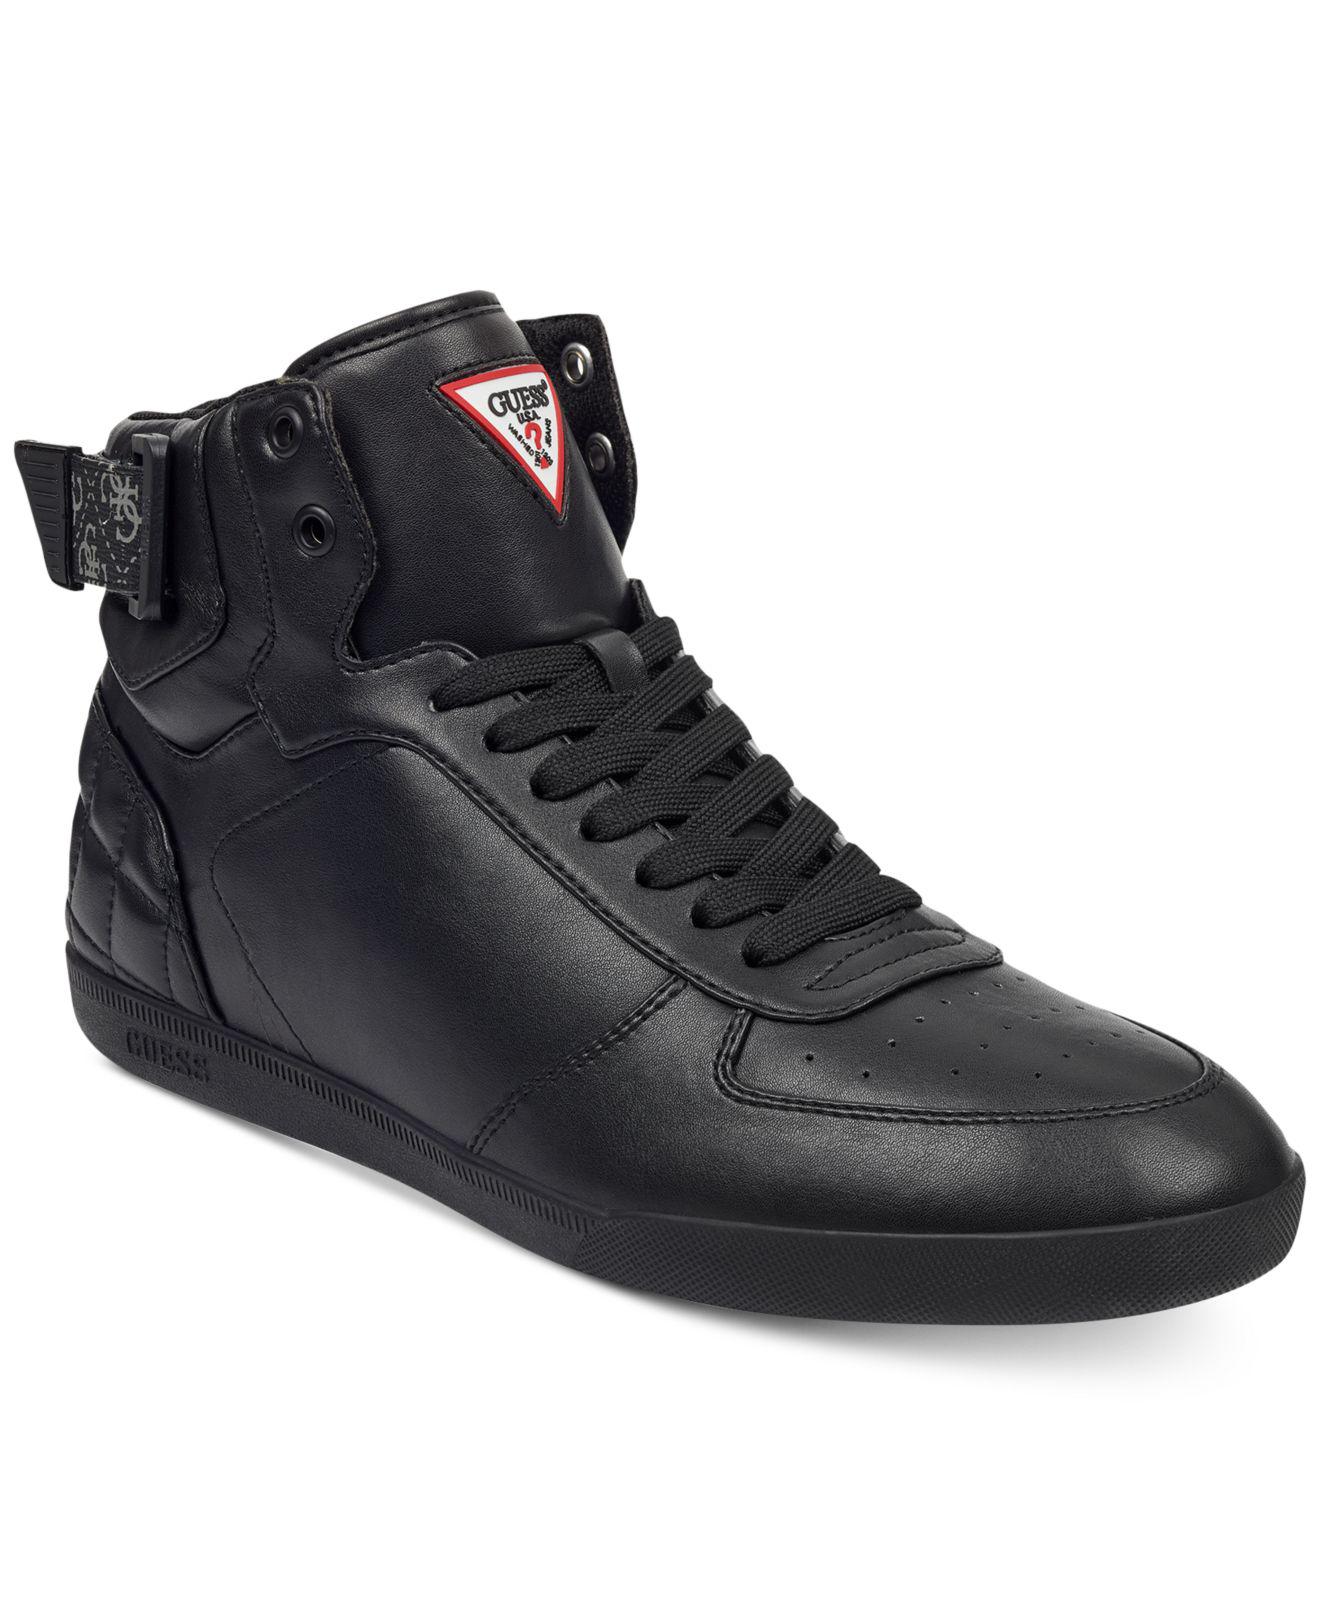 Guess Fitz High-top Sneakers in Black for Men - Lyst